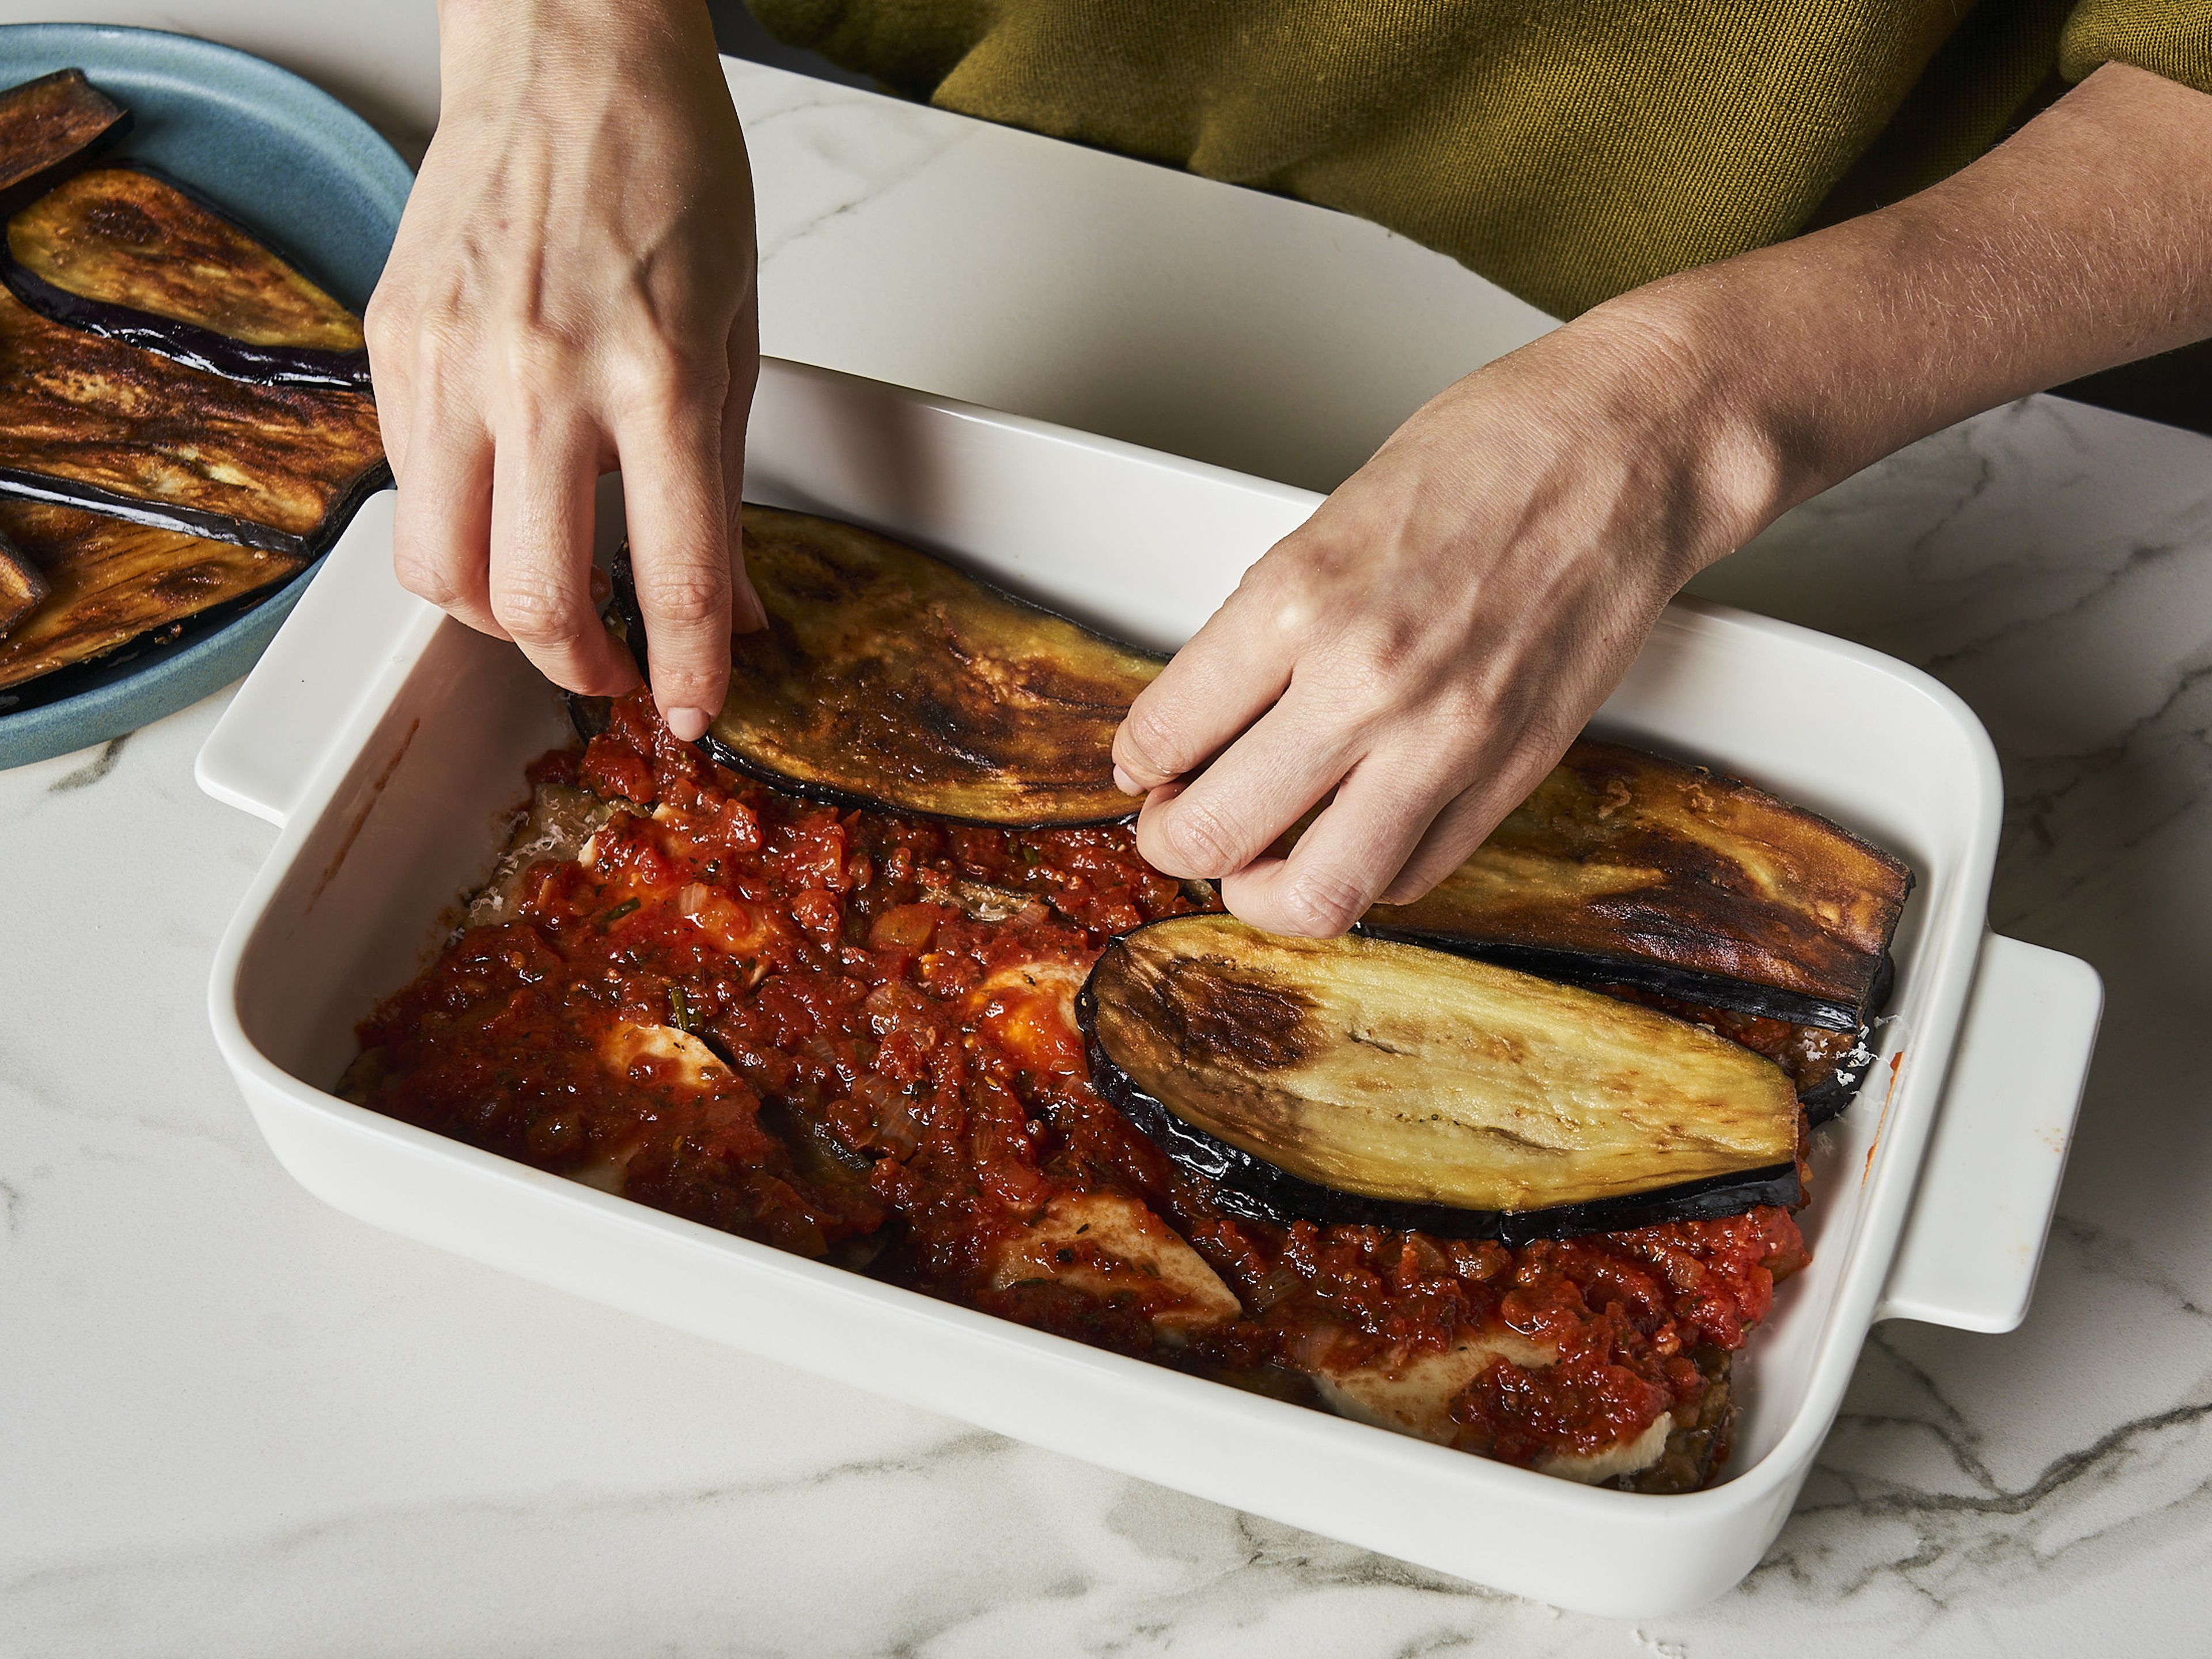 Preheat the oven to 180°C/350 °F. In a baking dish, build layers in the following order: Tomato sauce, eggplant, mozzarella and a little grated Parmesan on top. Repeat approx. 1–2 times, depending on the size of your baking dish.